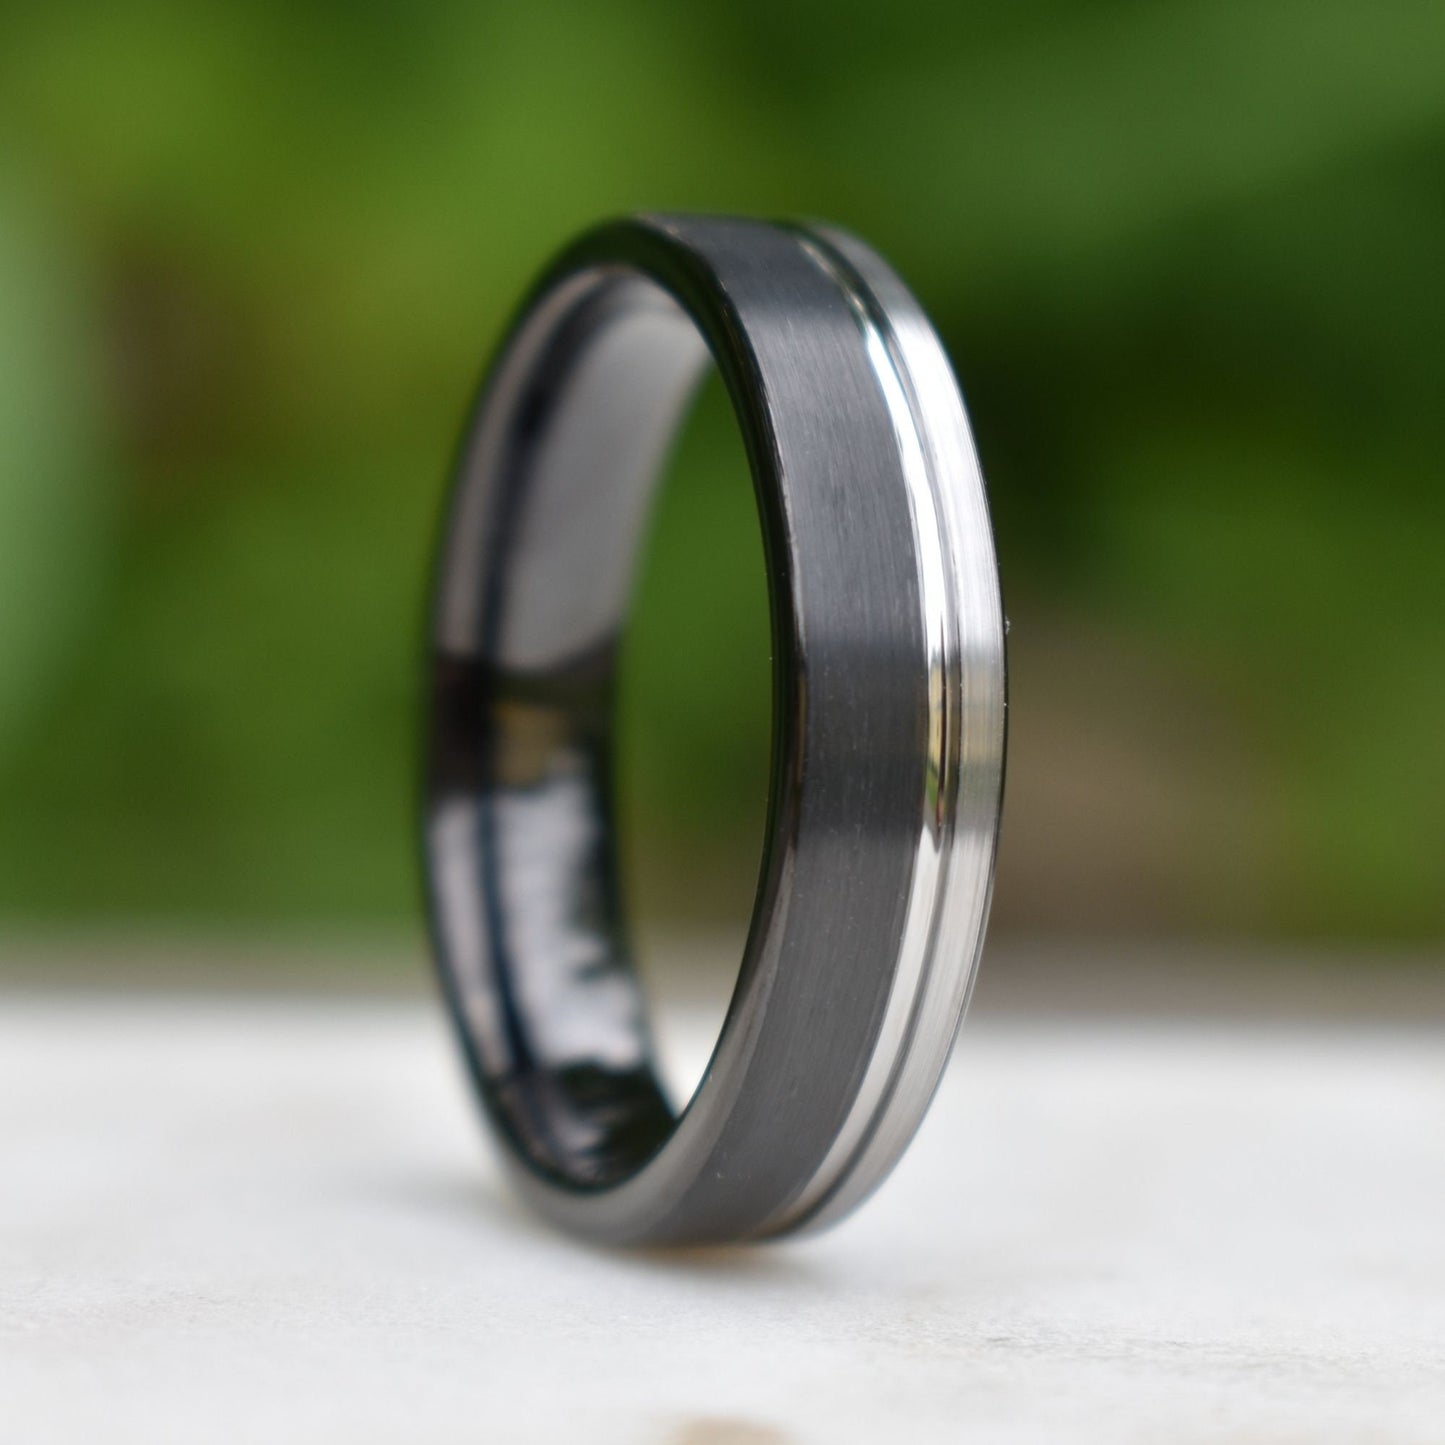 Tungsten Ring 6mm Black and Silver Brushed with Polished Silver Accent, Mens Ring, Mens Wedding Band